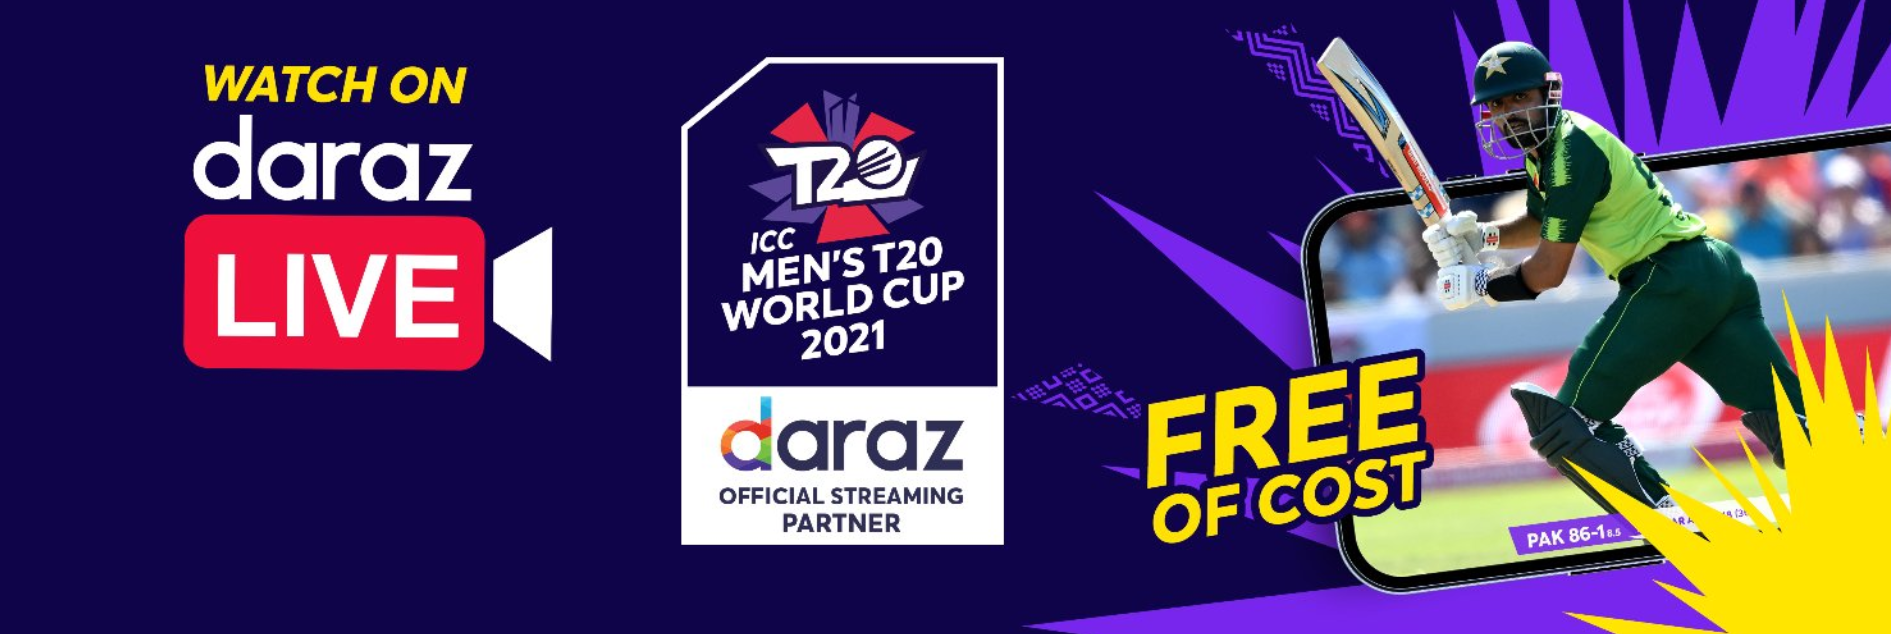  Daraz Becomes Exclusive Digital Streaming Partner for ICC T20 World Cup 2021 in Pakistan